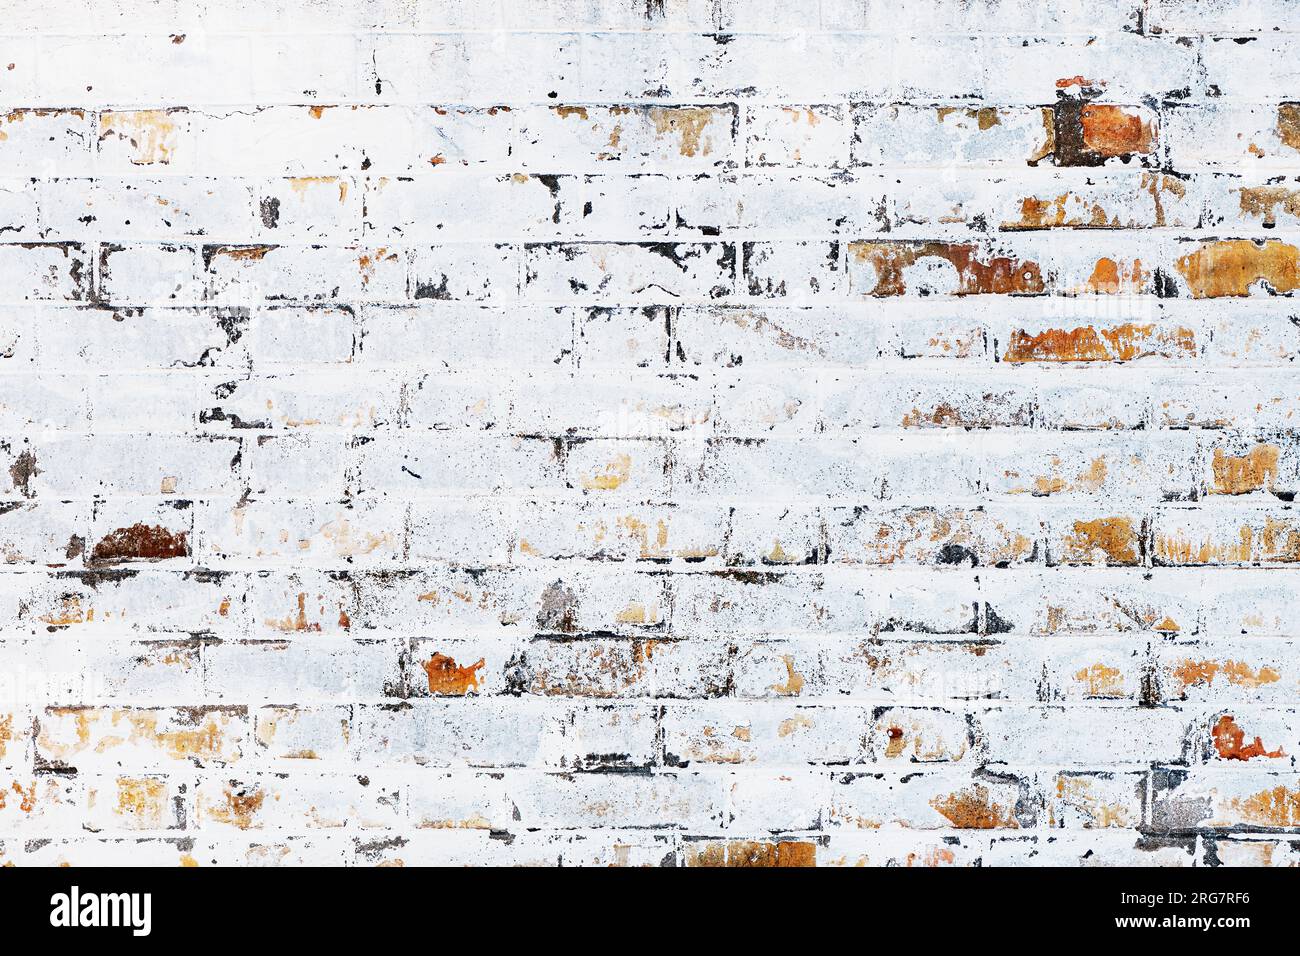 Old brick wall with white paint peeling off the surface, grunge texture and background Stock Photo